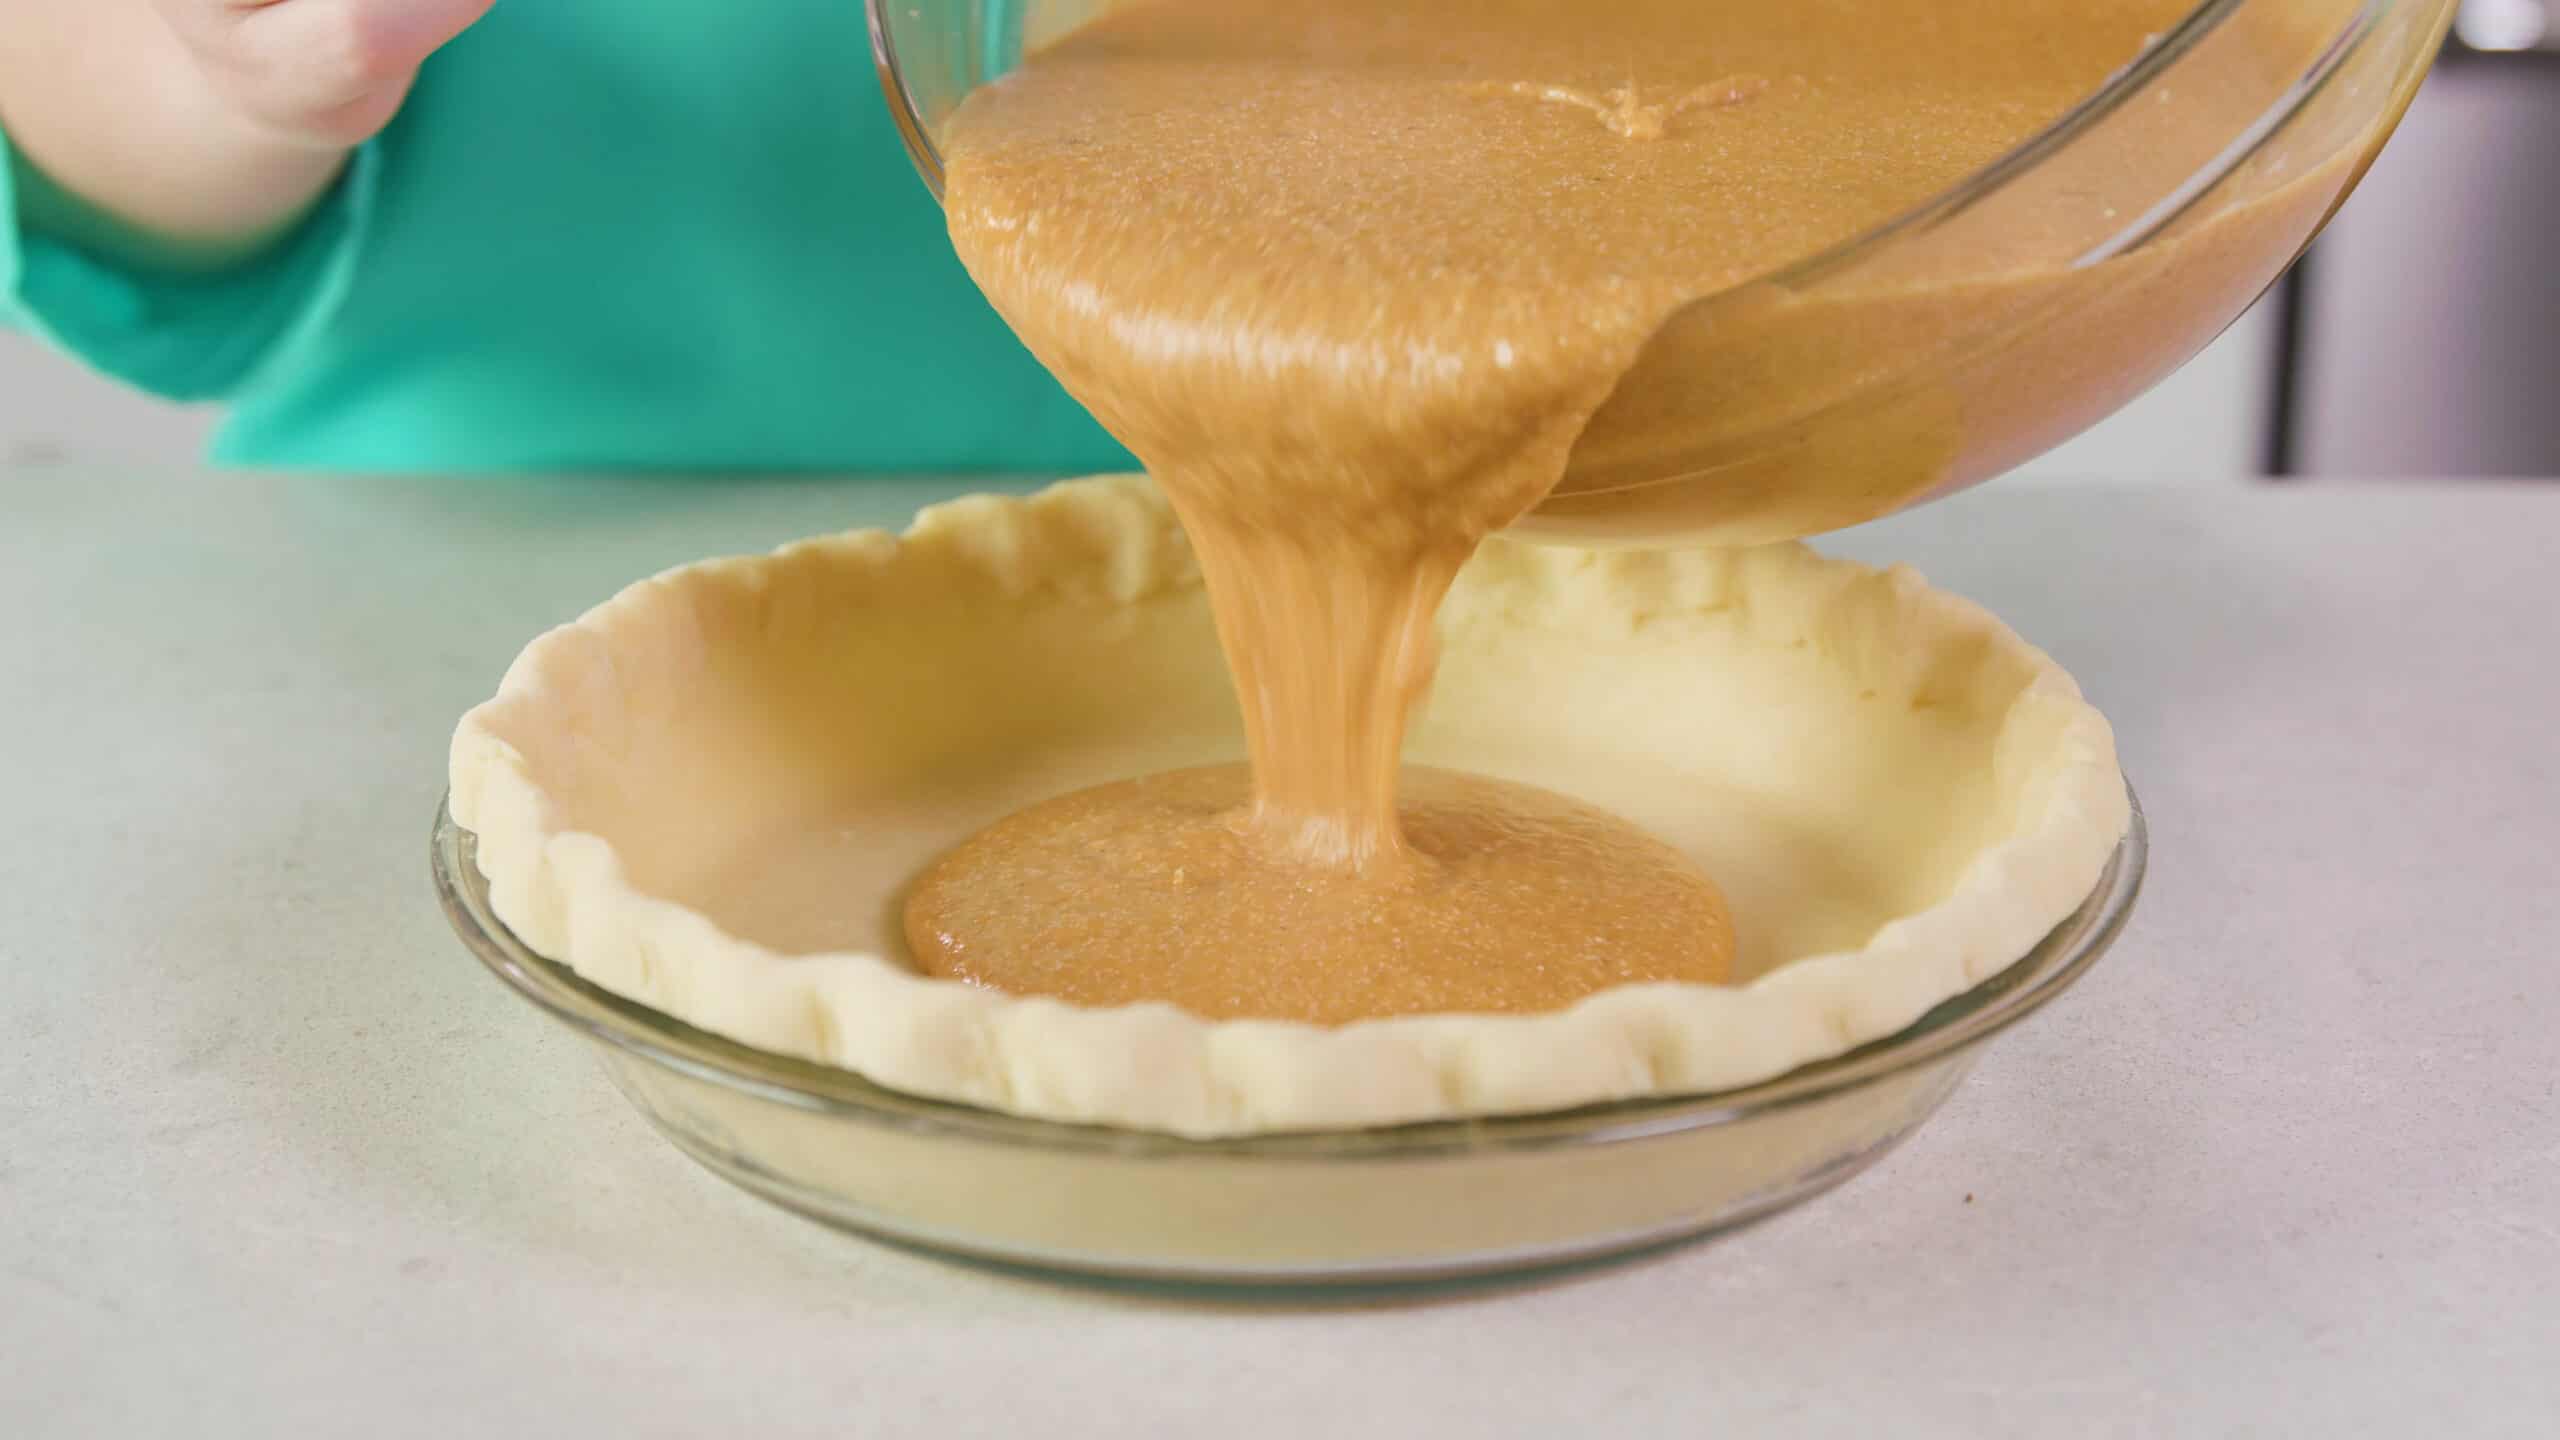 Angled view of prepared uncooked pie crust in a clear glass pie plate with sweet potato pie filling being poured in from large clear glass mixing bowl.